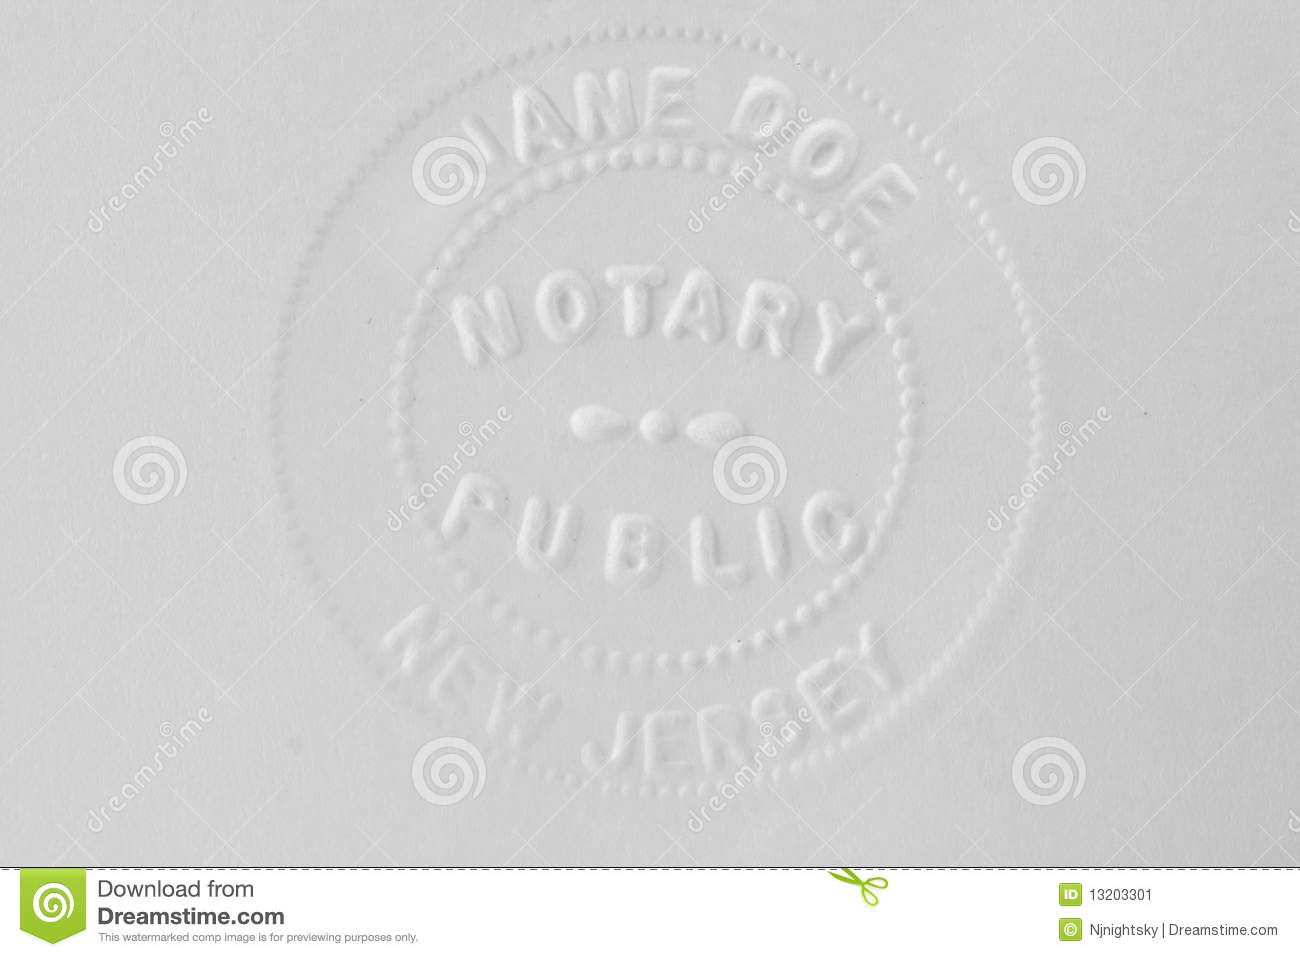 Notary Stamp Stock Image   Image  13203301